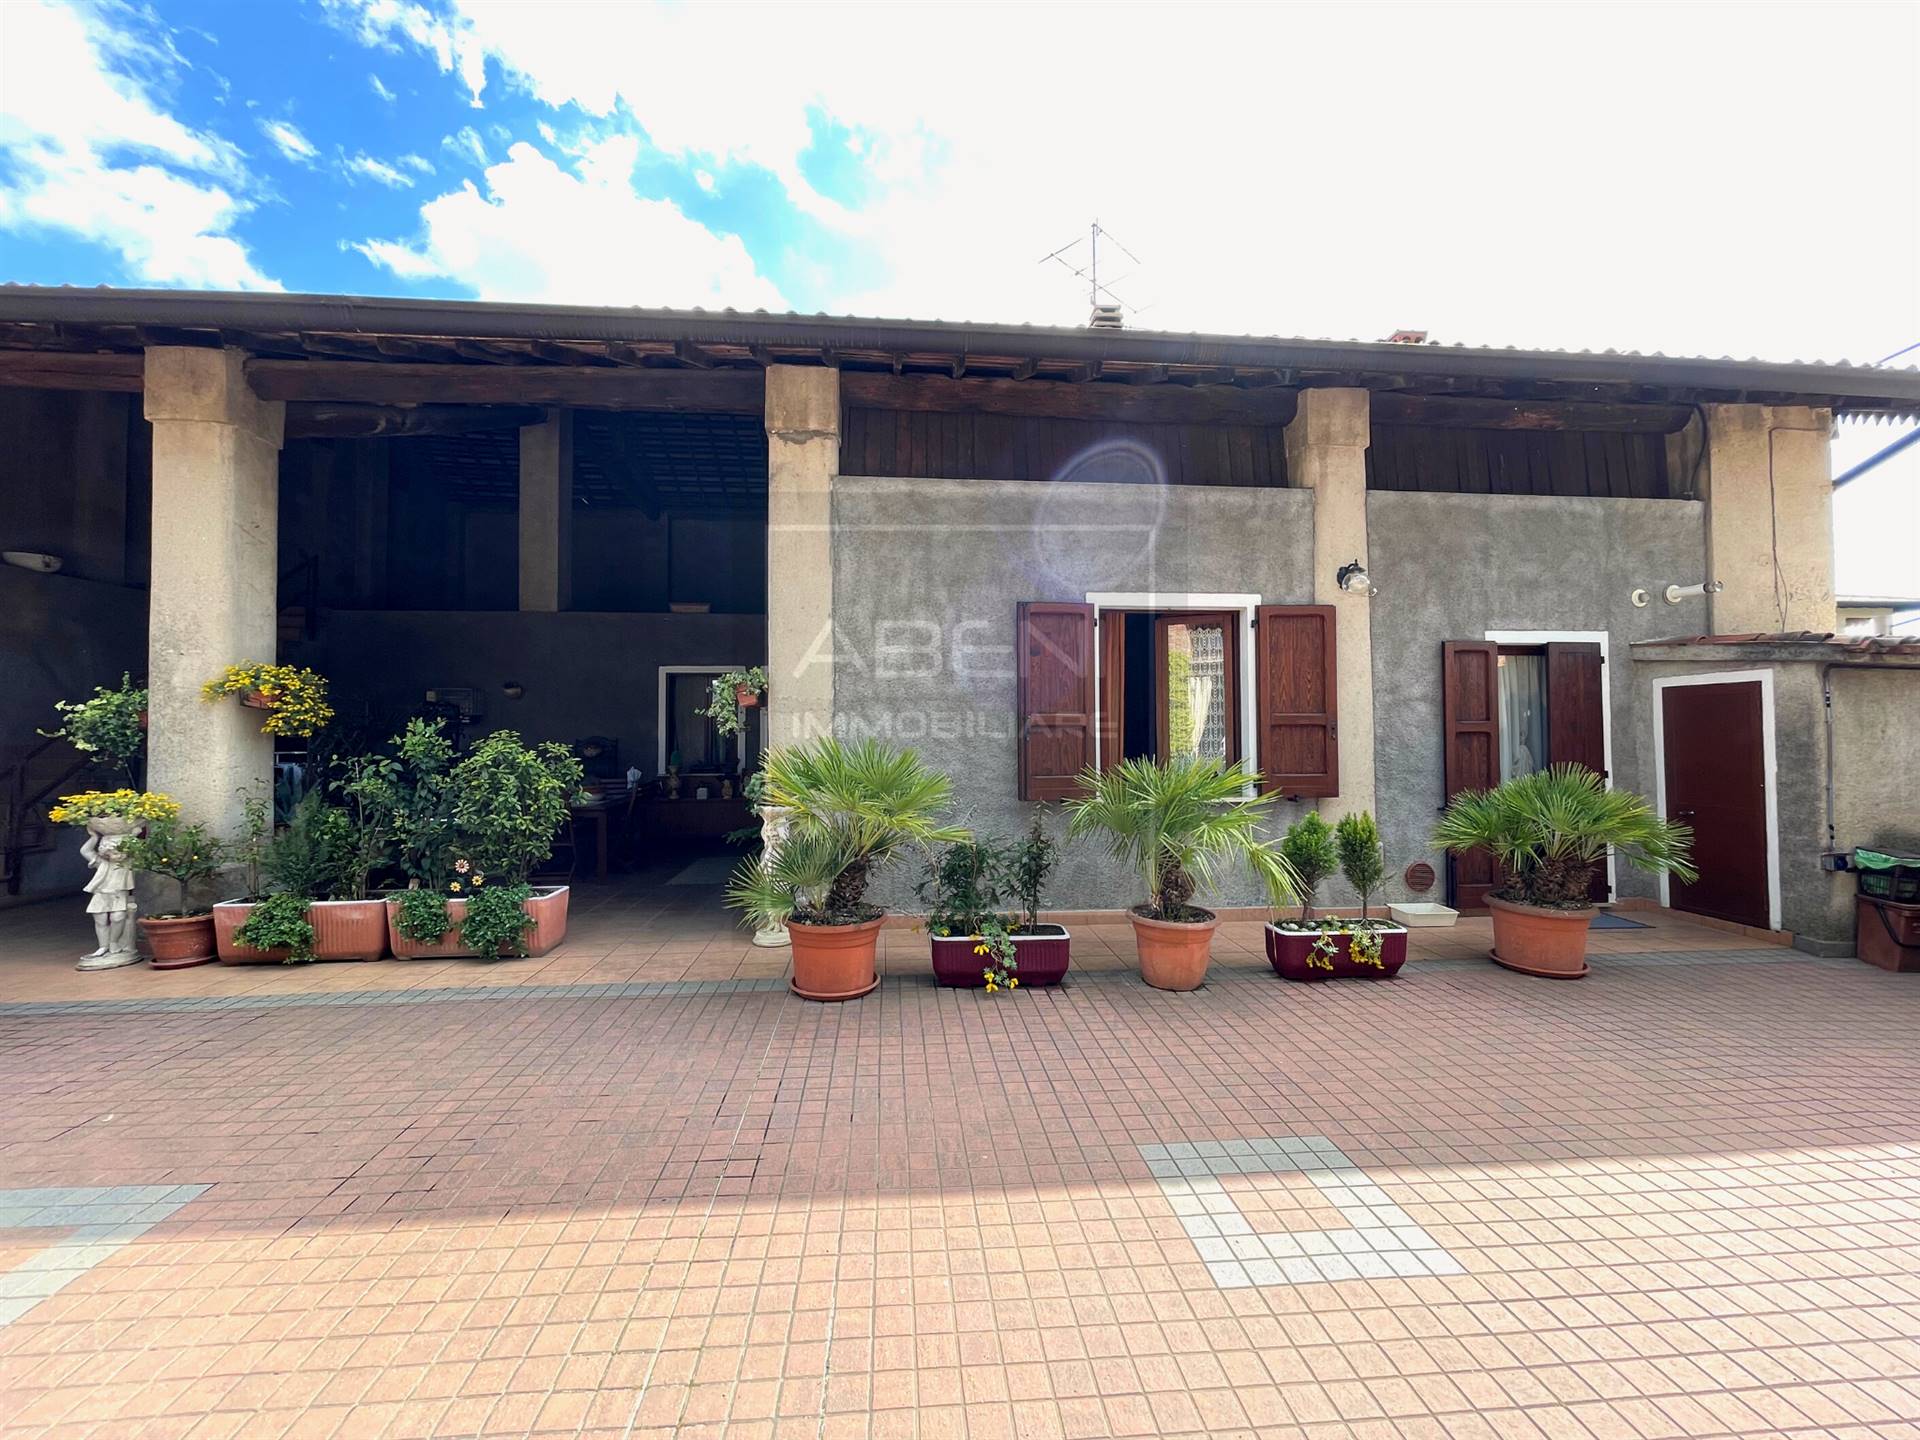 TERZAGO, CALVAGESE DELLA RIVIERA, Single house for sale of 205 Sq. mt., Good condition, Heating Individual heating system, Energetic class: G, 